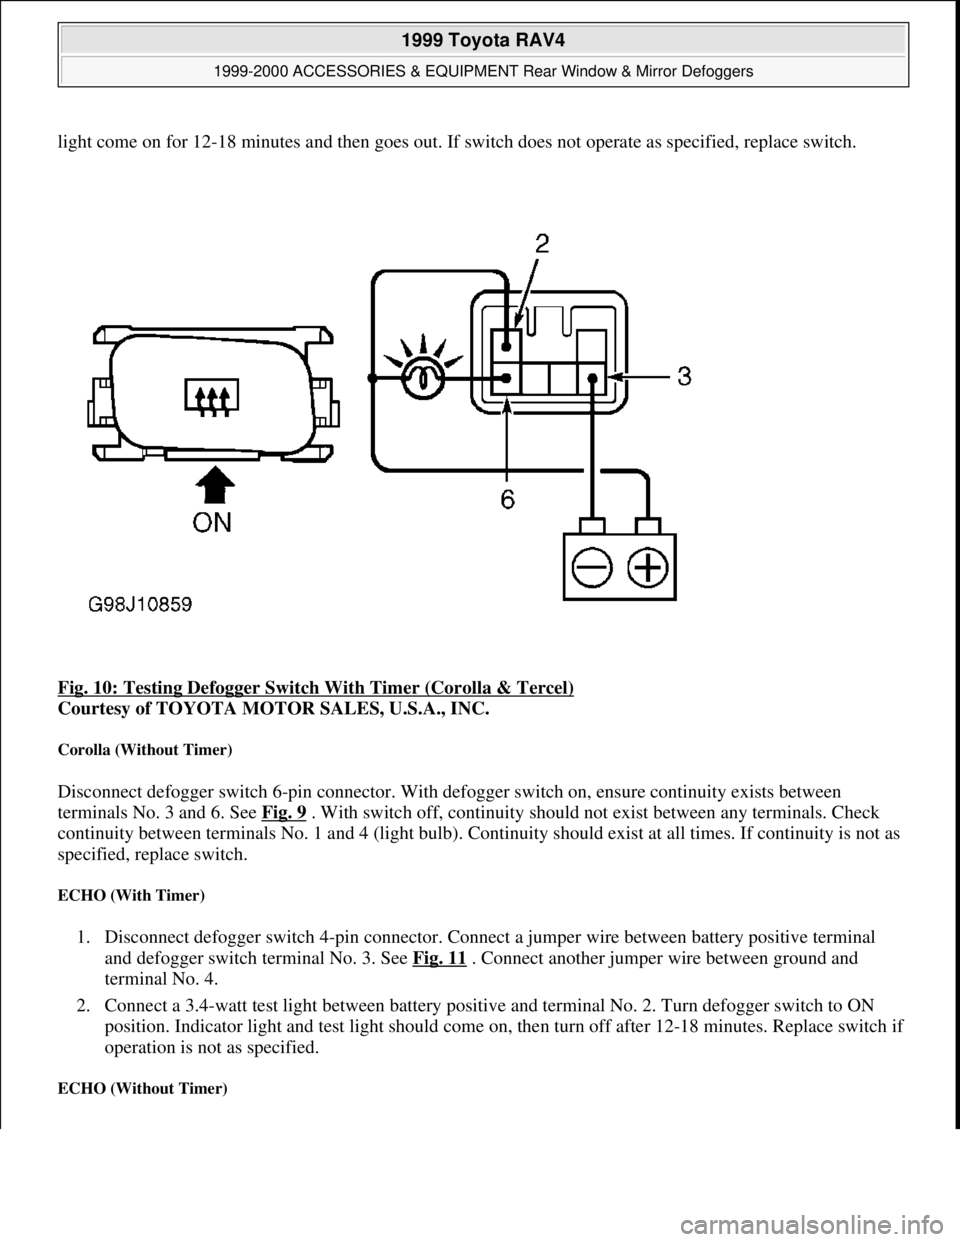 TOYOTA RAV4 1996  Service Repair Manual light come on for 12-18 minutes and then goes out. If switch does not operate as specified, replace switch.
Fig. 10: Testing Defogger Switch With Timer (Corolla & Tercel)
 
Courtesy of TOYOTA MOTOR SA